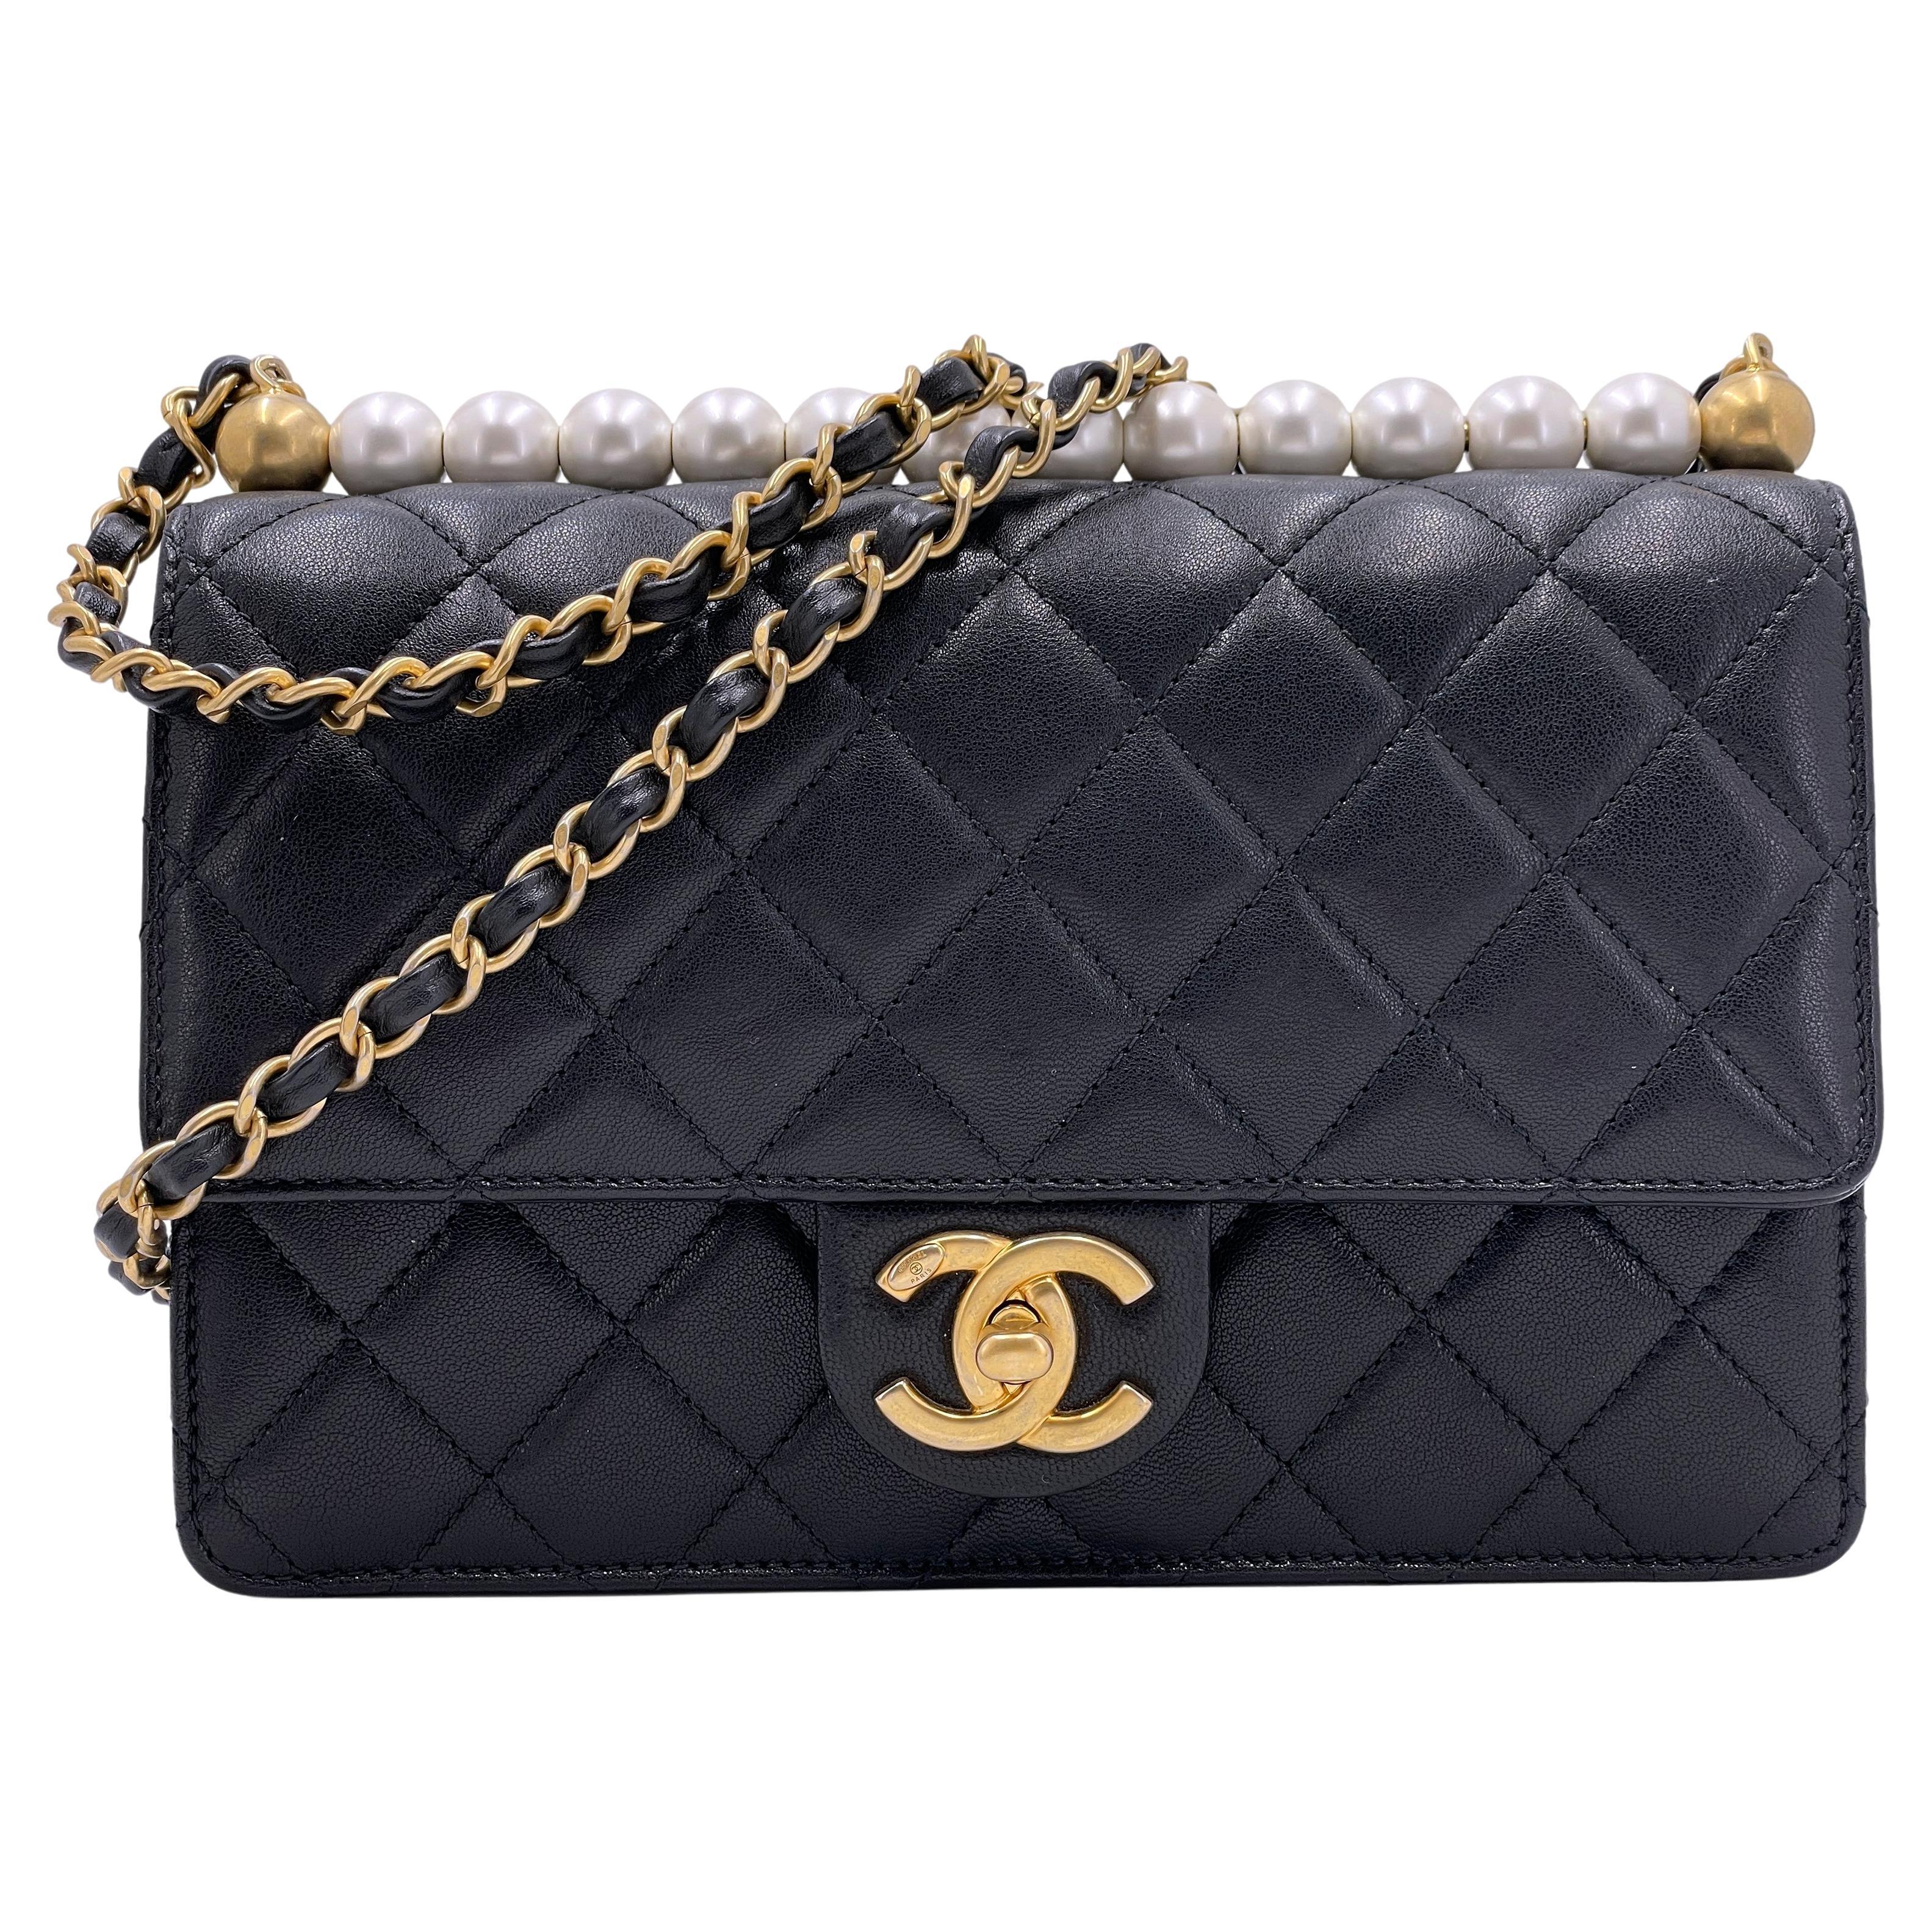 Pristine 19S Chanel Chic Pearls Quilted Flap Bag Black GHW 66675